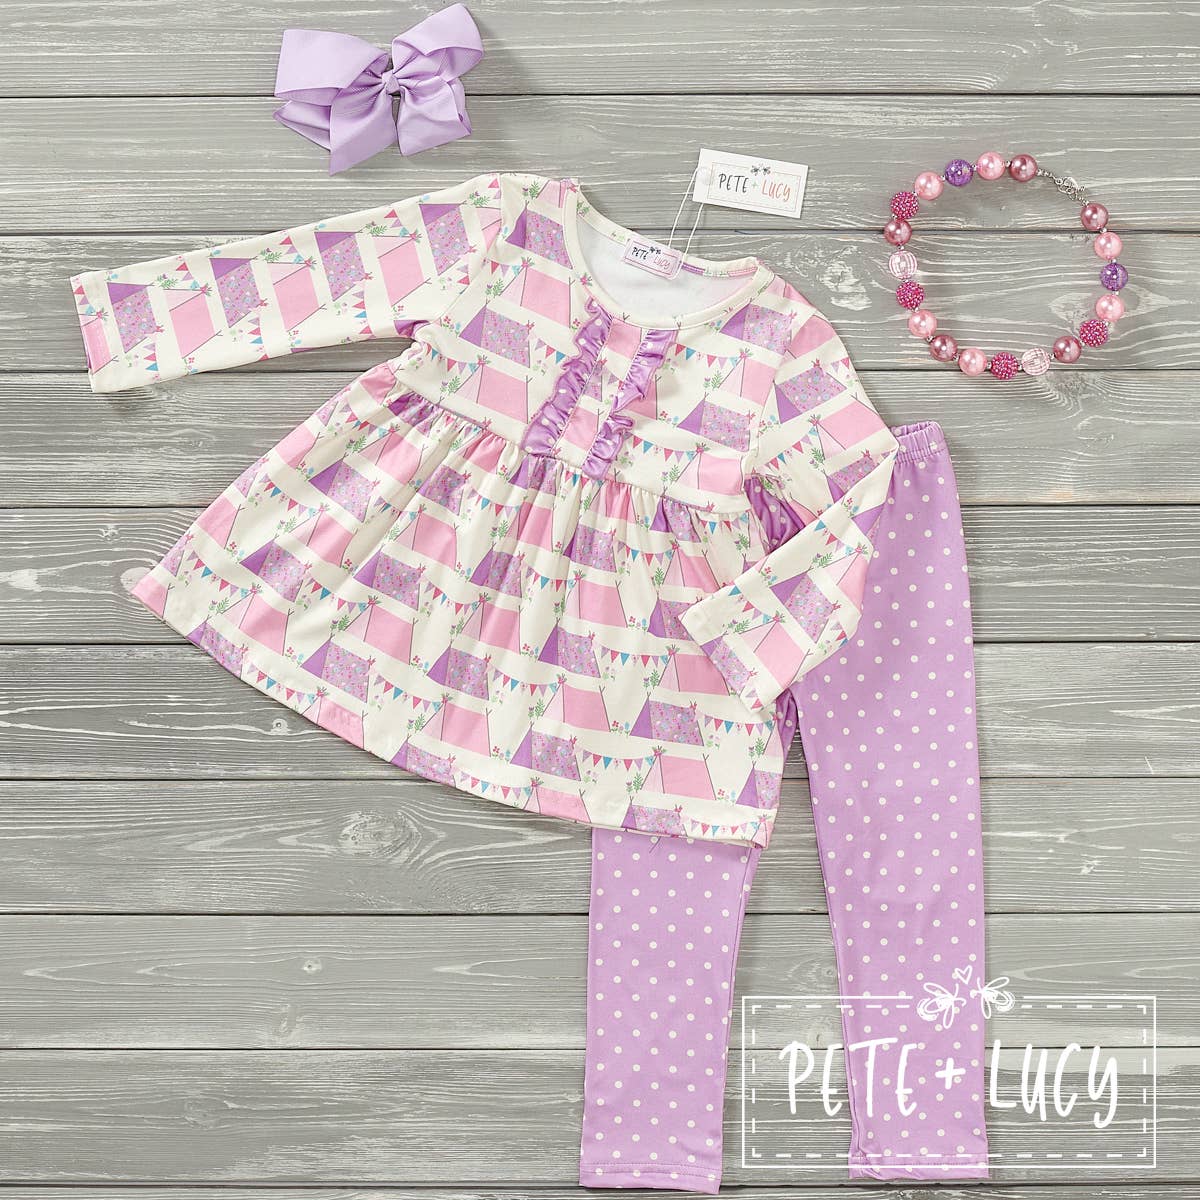 PETE + LUCY Fancy Camping 2 Piece Set Pants Babydoll Top Pink